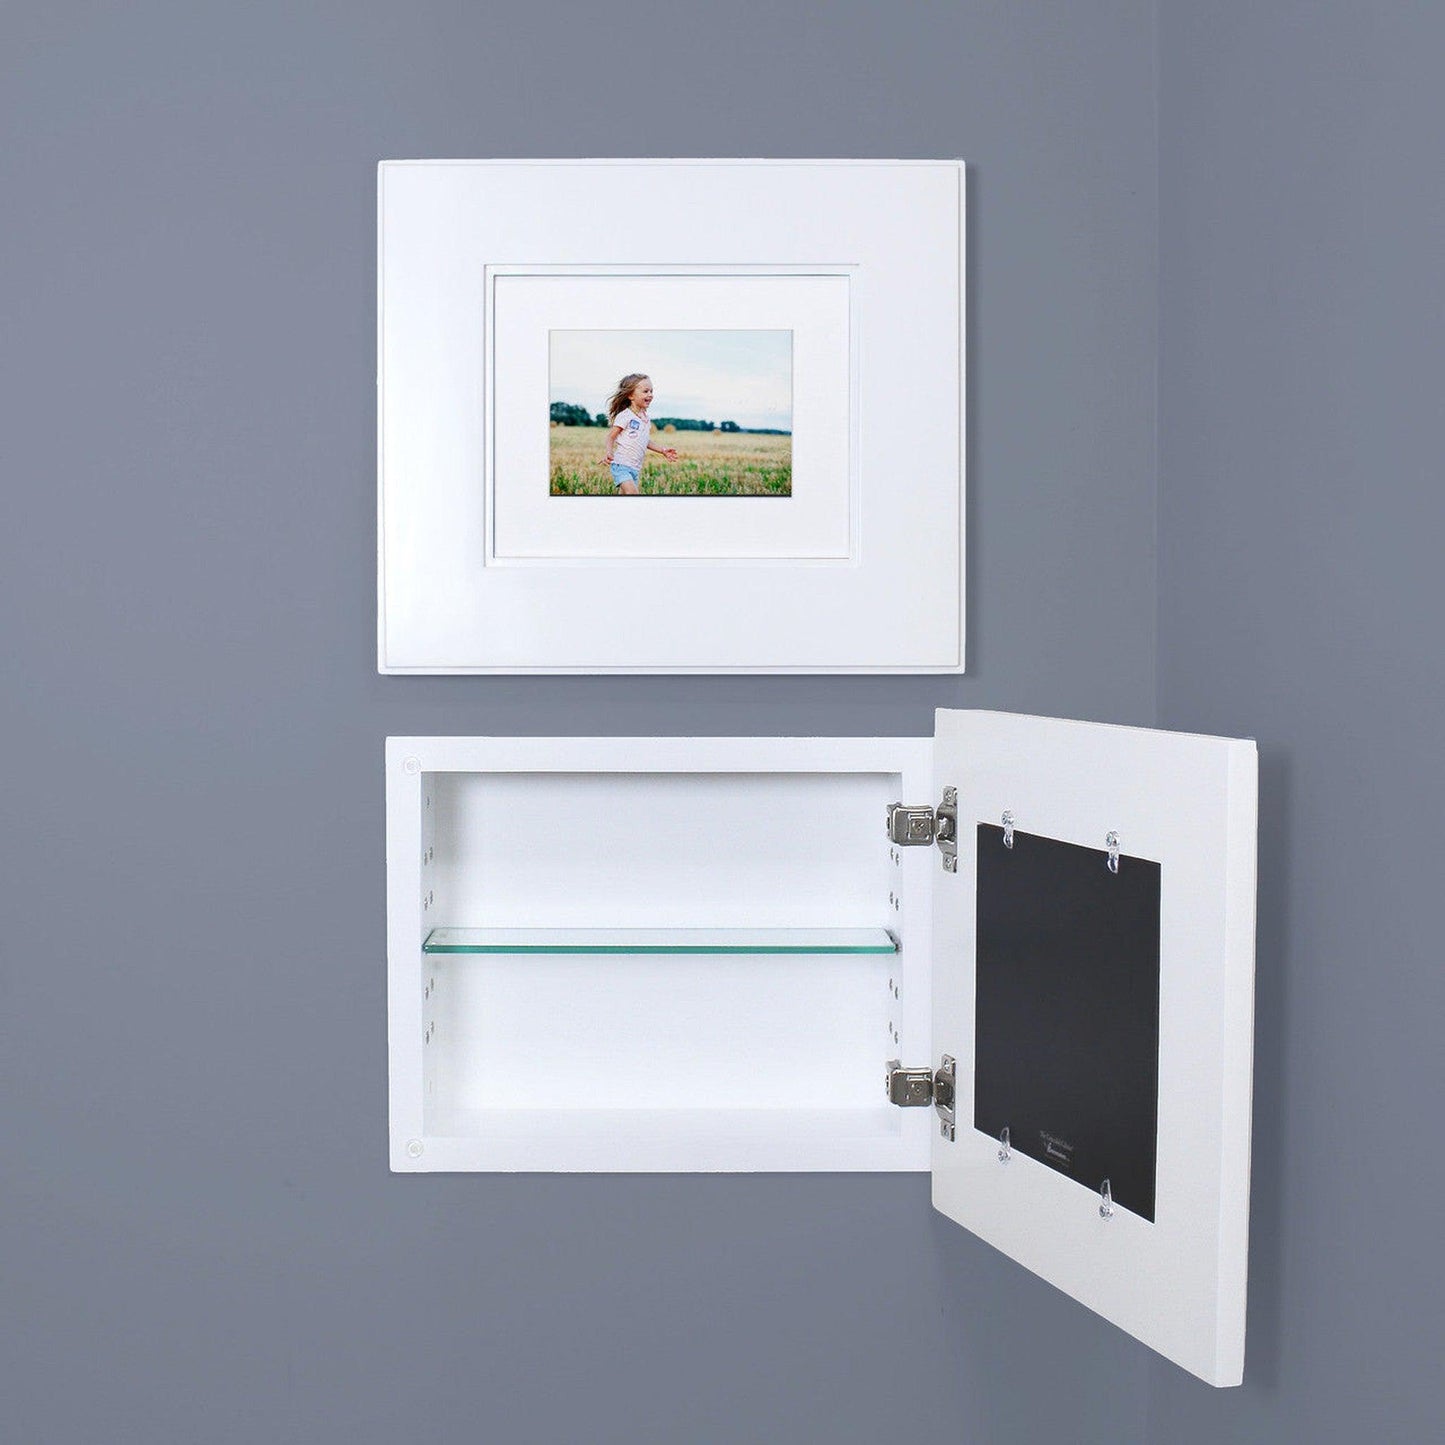 Fox Hollow Furnishings 14" x 11" White Compact Landscape Shaker Standard Deph Recessed Picture Frame Medicine Cabinet With Mirror and Ivory Matting